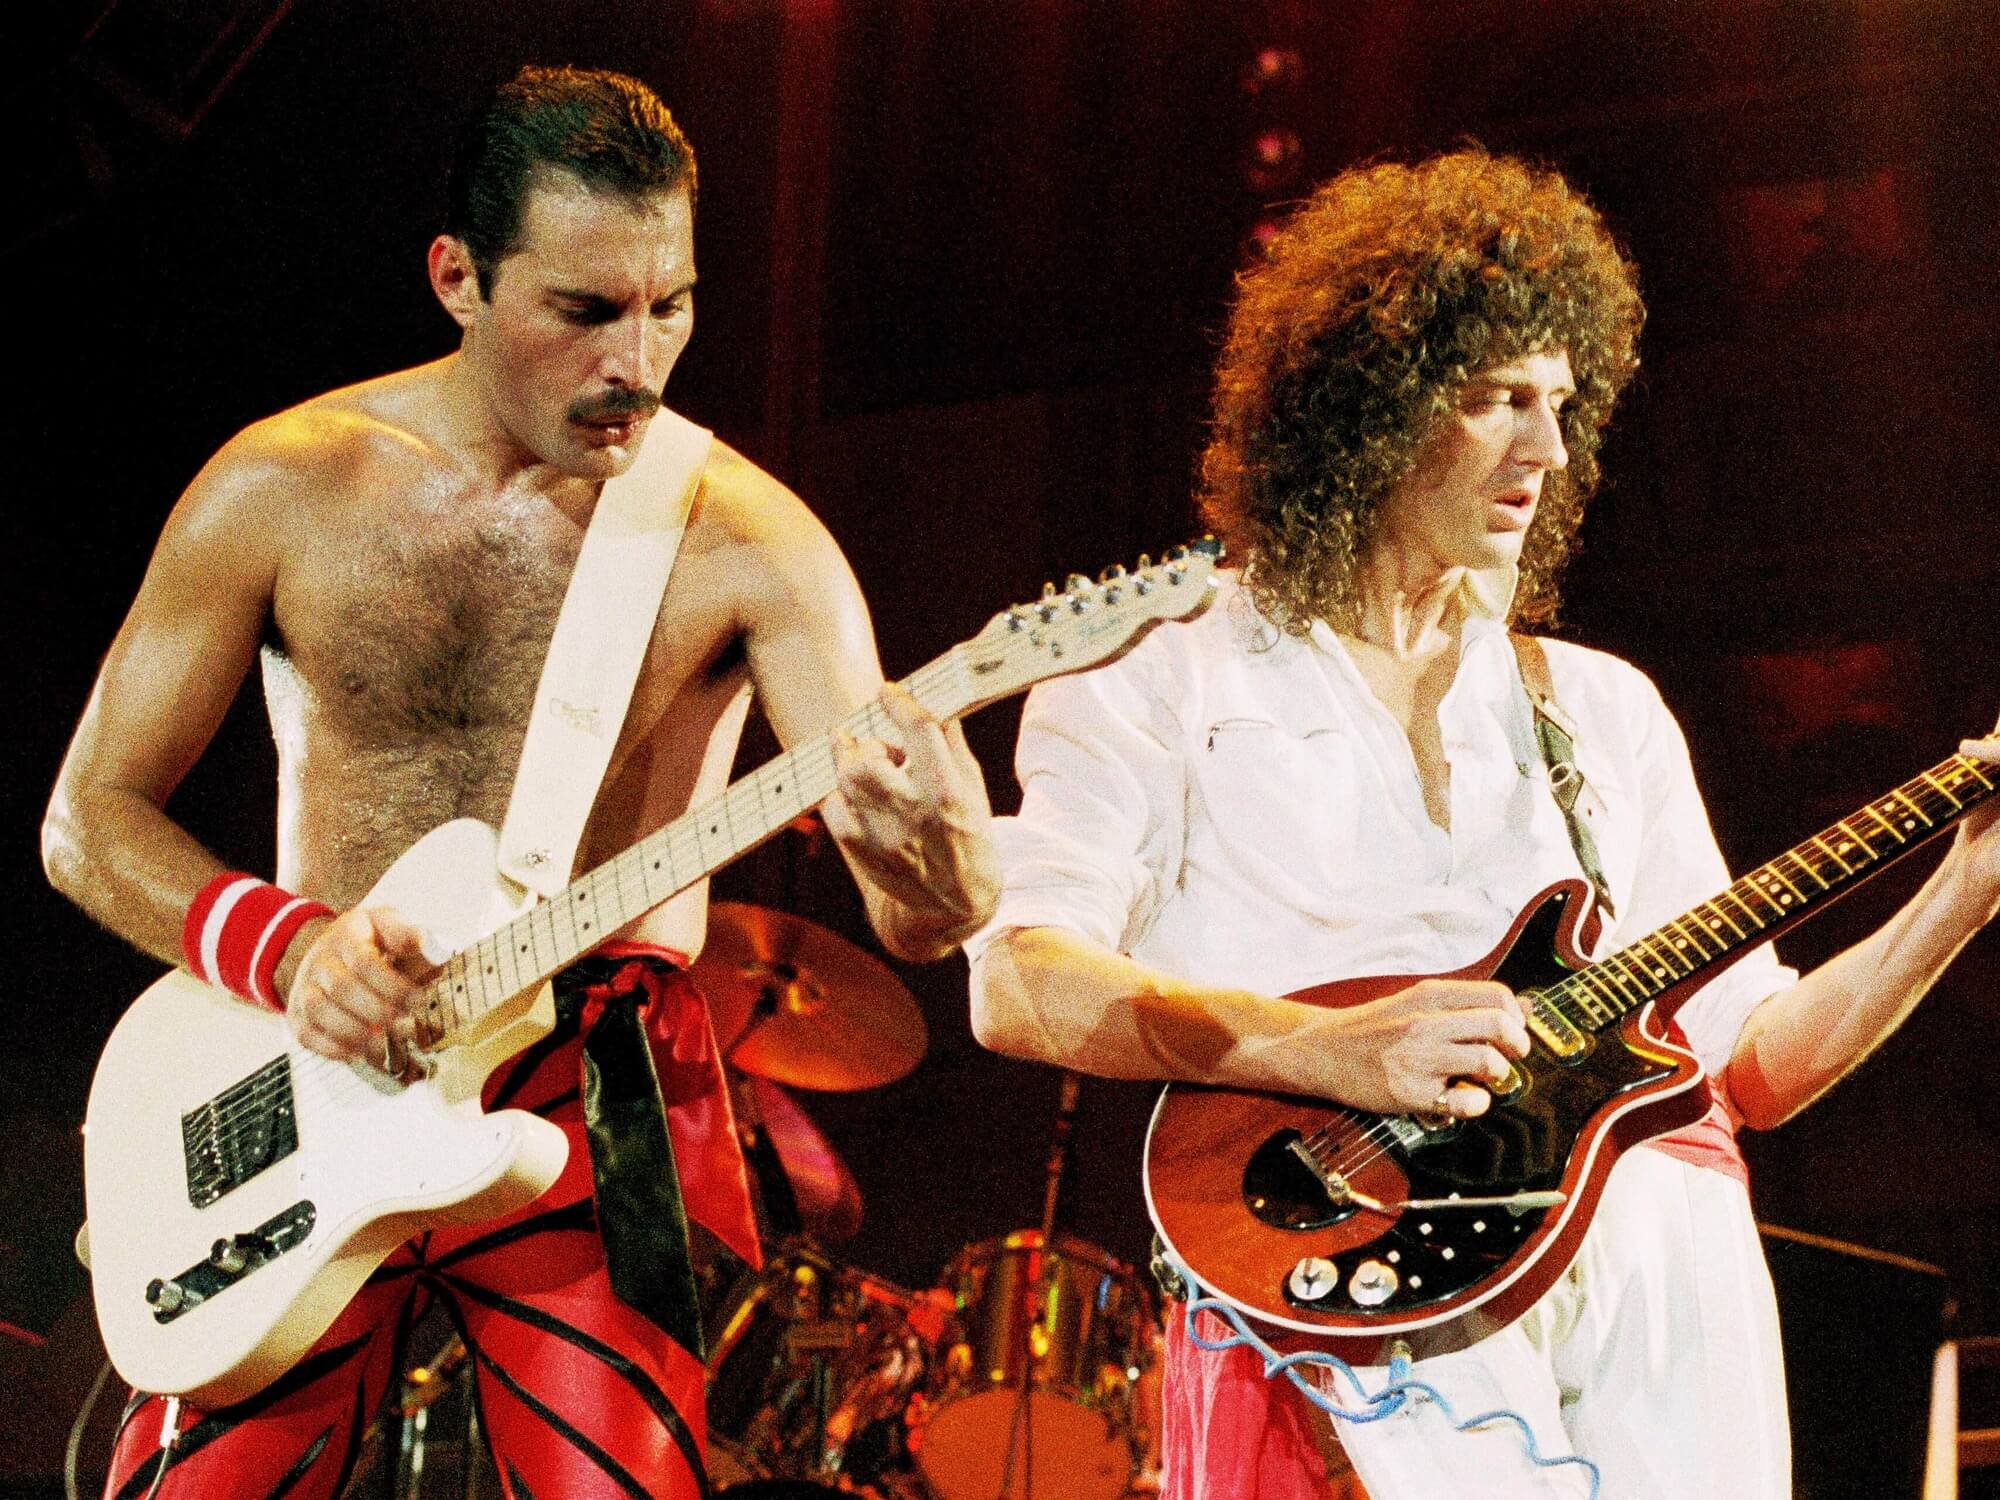 Queen's Freddie Mercury and Brian May performing on stage